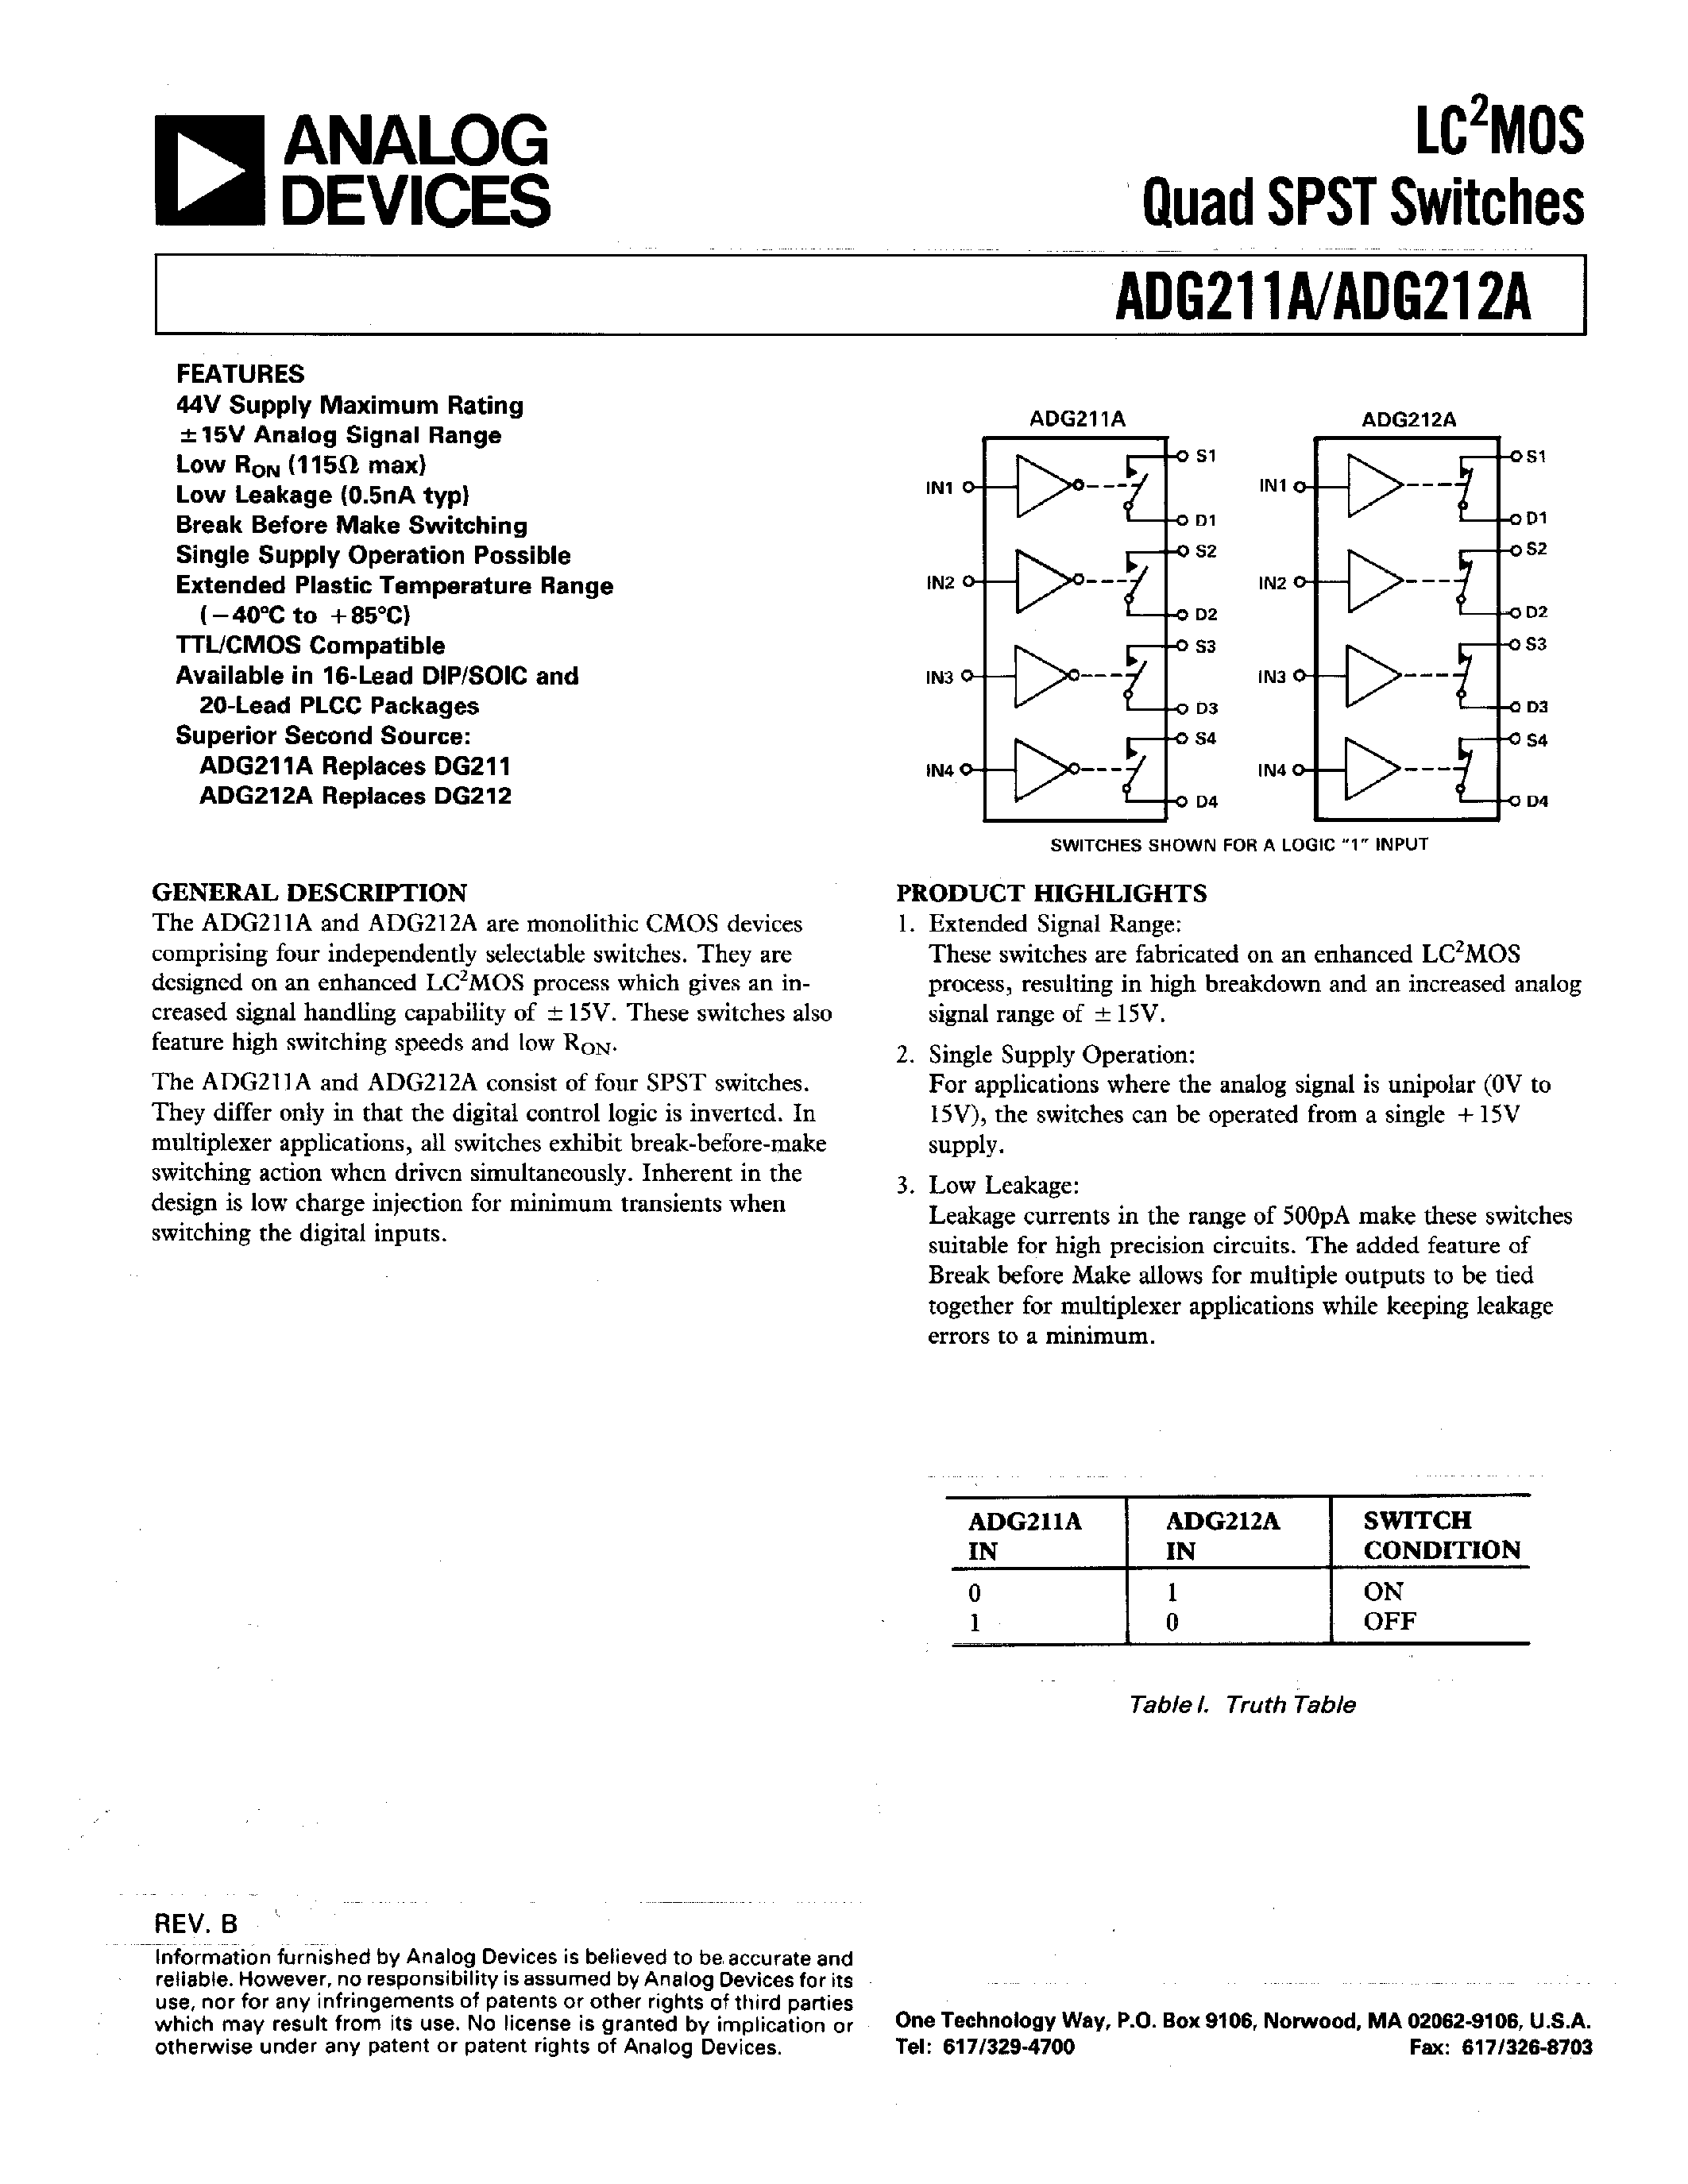 Datasheet ADG211A - LC2MOS QUAD SPST SWITCHES page 1